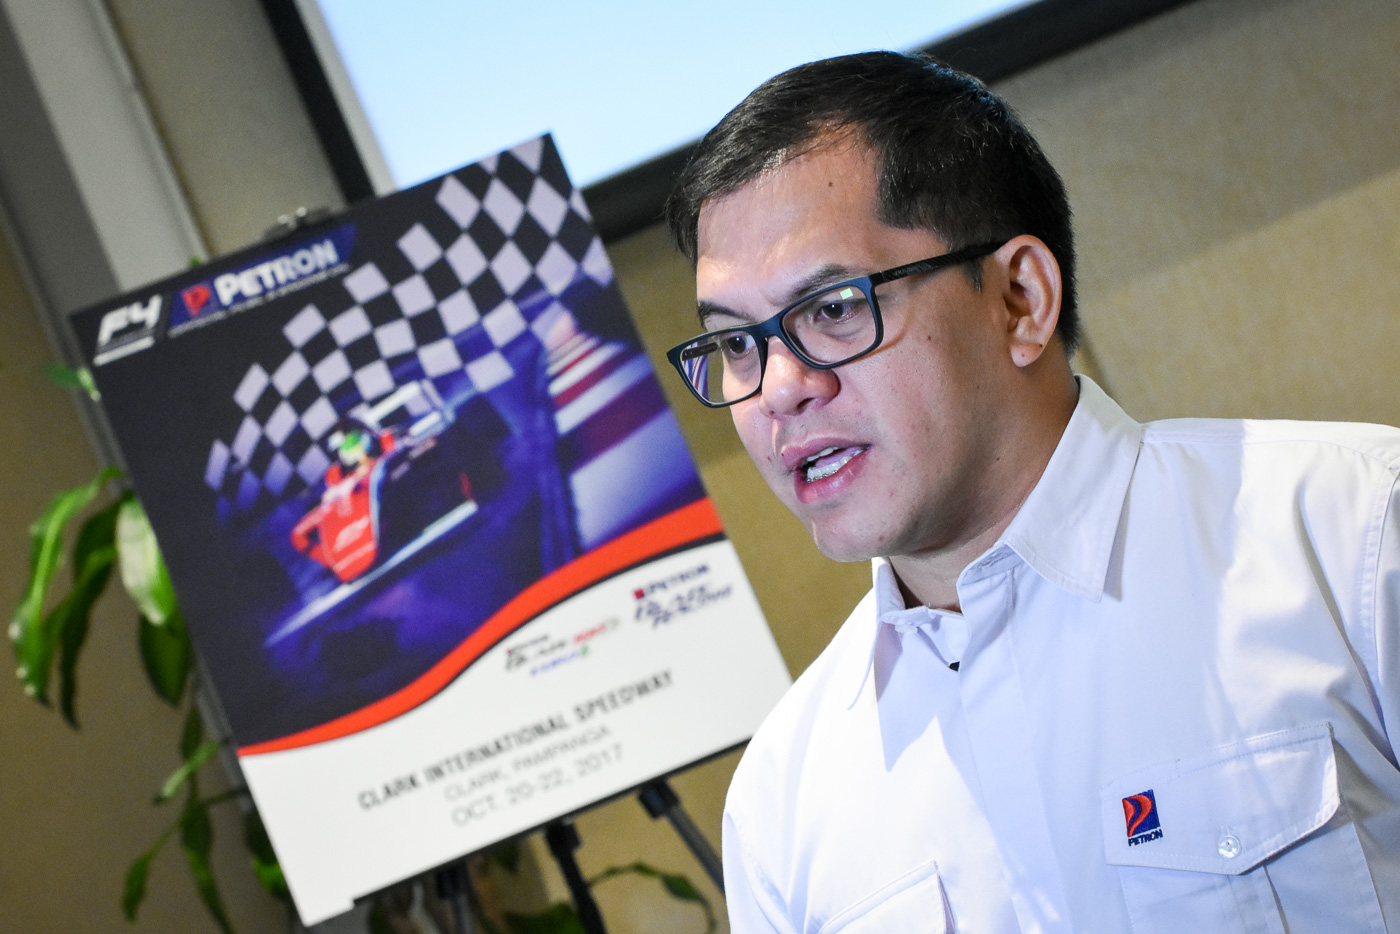 THE FORMULA DREAM. Local Station Marketing Head Bong Paguia announces that Petron products will be used by F4 racers in Malaysia, the Philippines, Indonesia, and Thailand. All photos by Leanne Jazul/Rappler 